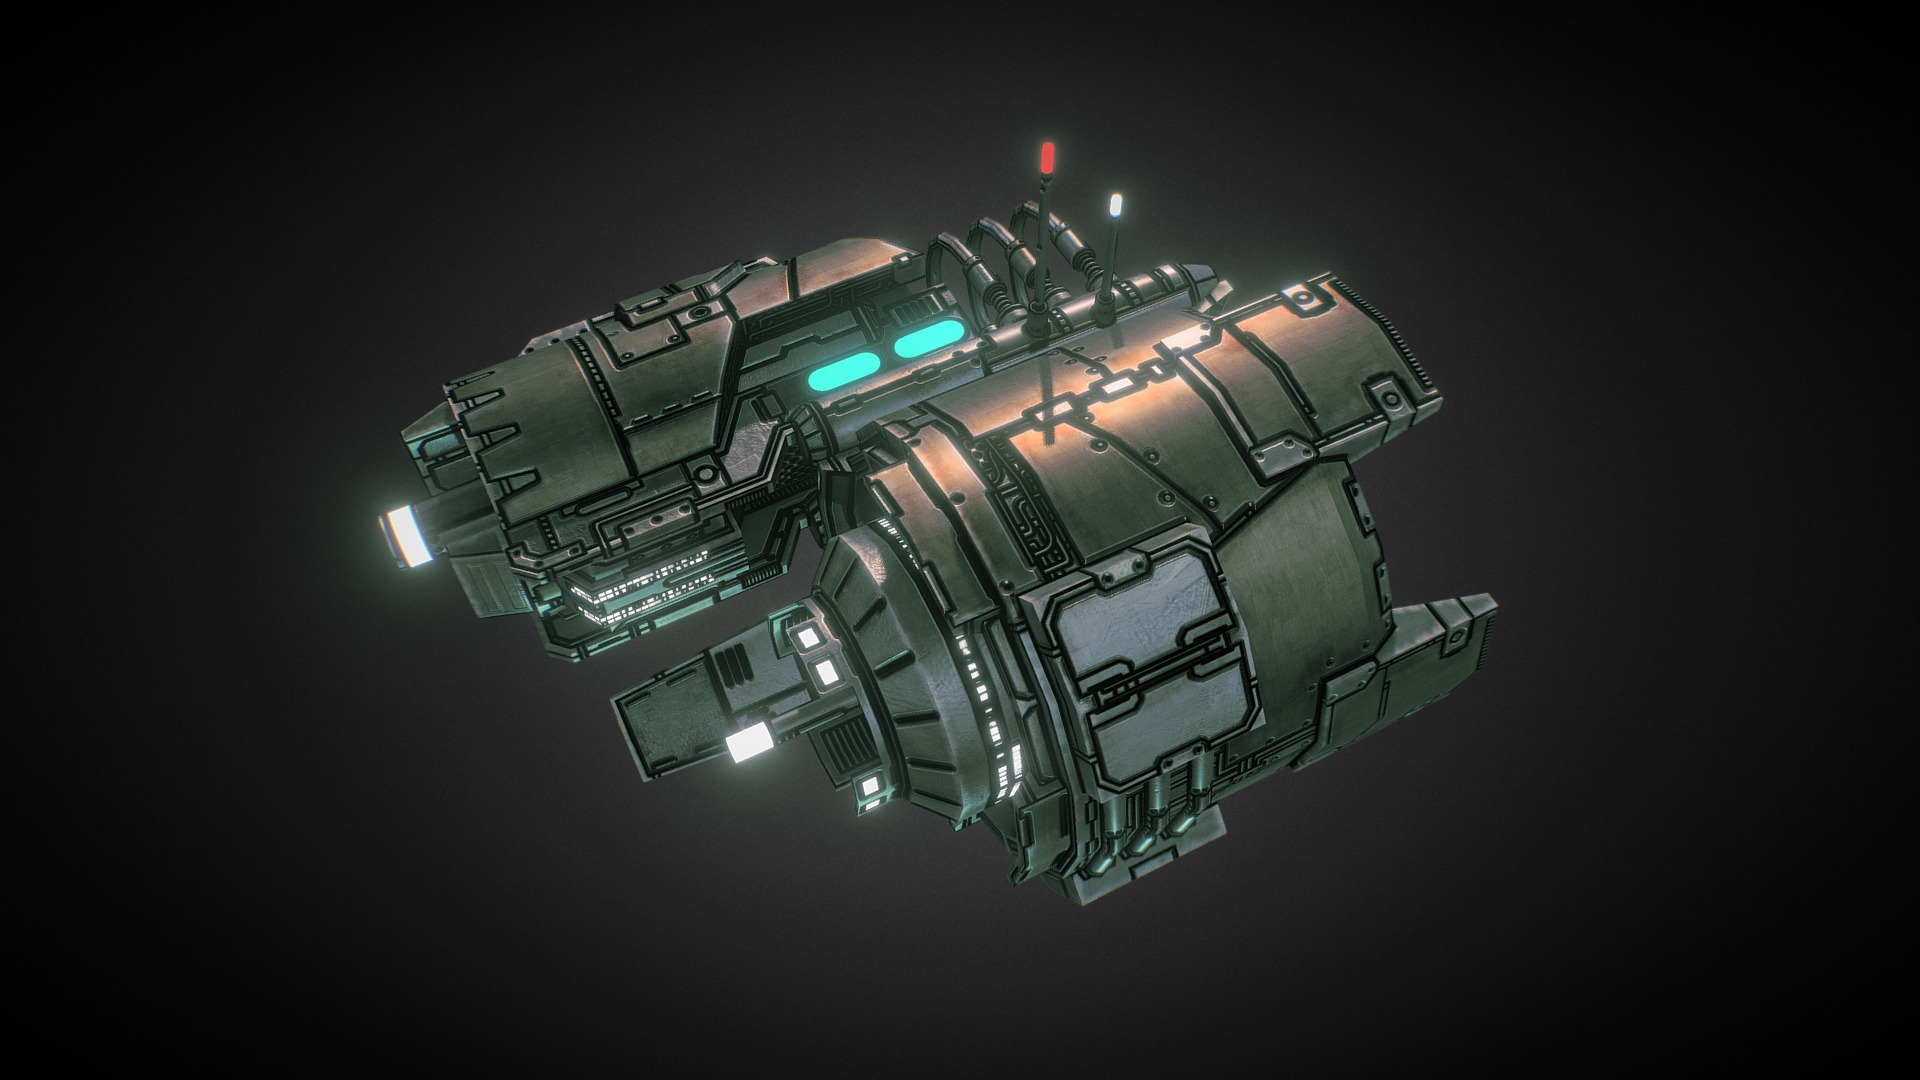 In-game model of a small spaceship belonging to the Deprived faction.
Learn more about the game at http://starfalltactics.com/ - Starfall Tactics — Gwydion Deprived frigate - 3D model by Snowforged Entertainment (@snowforged) 3d model